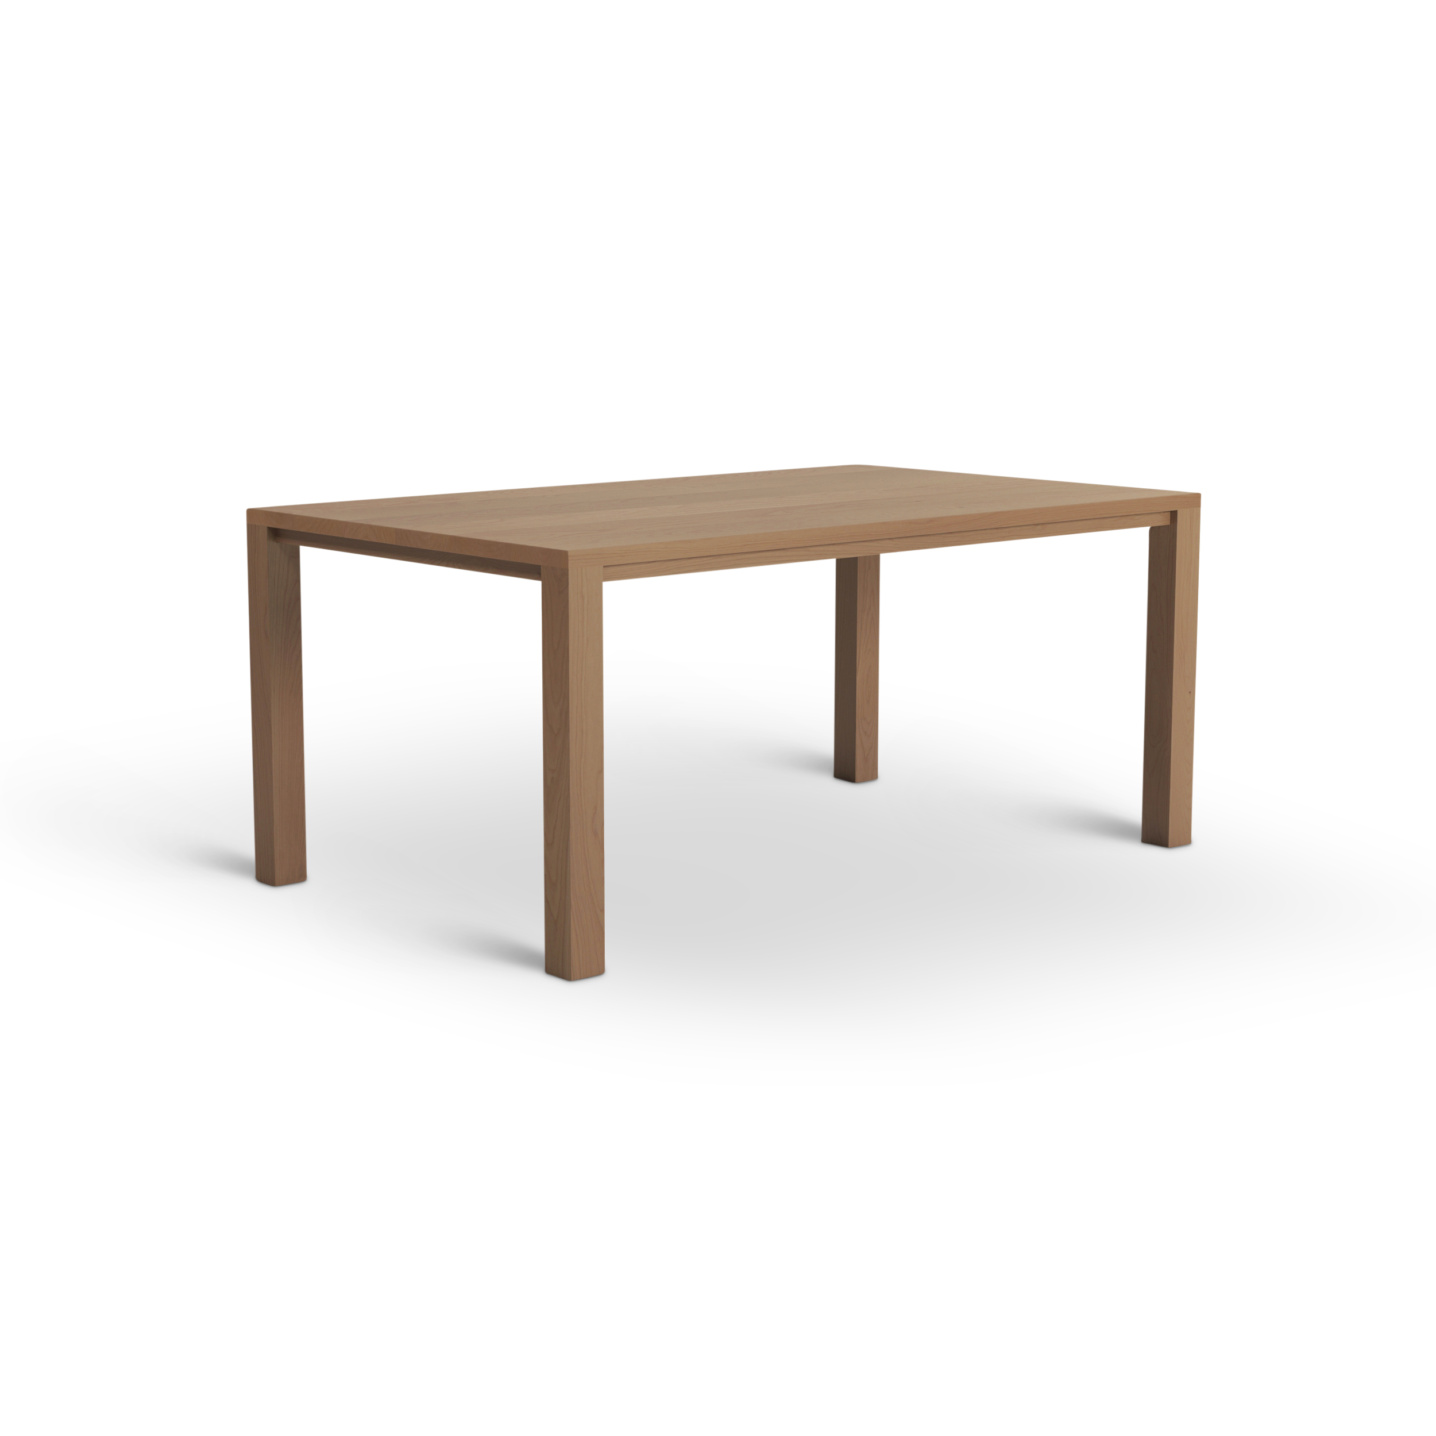 Solid cherry table with square legs